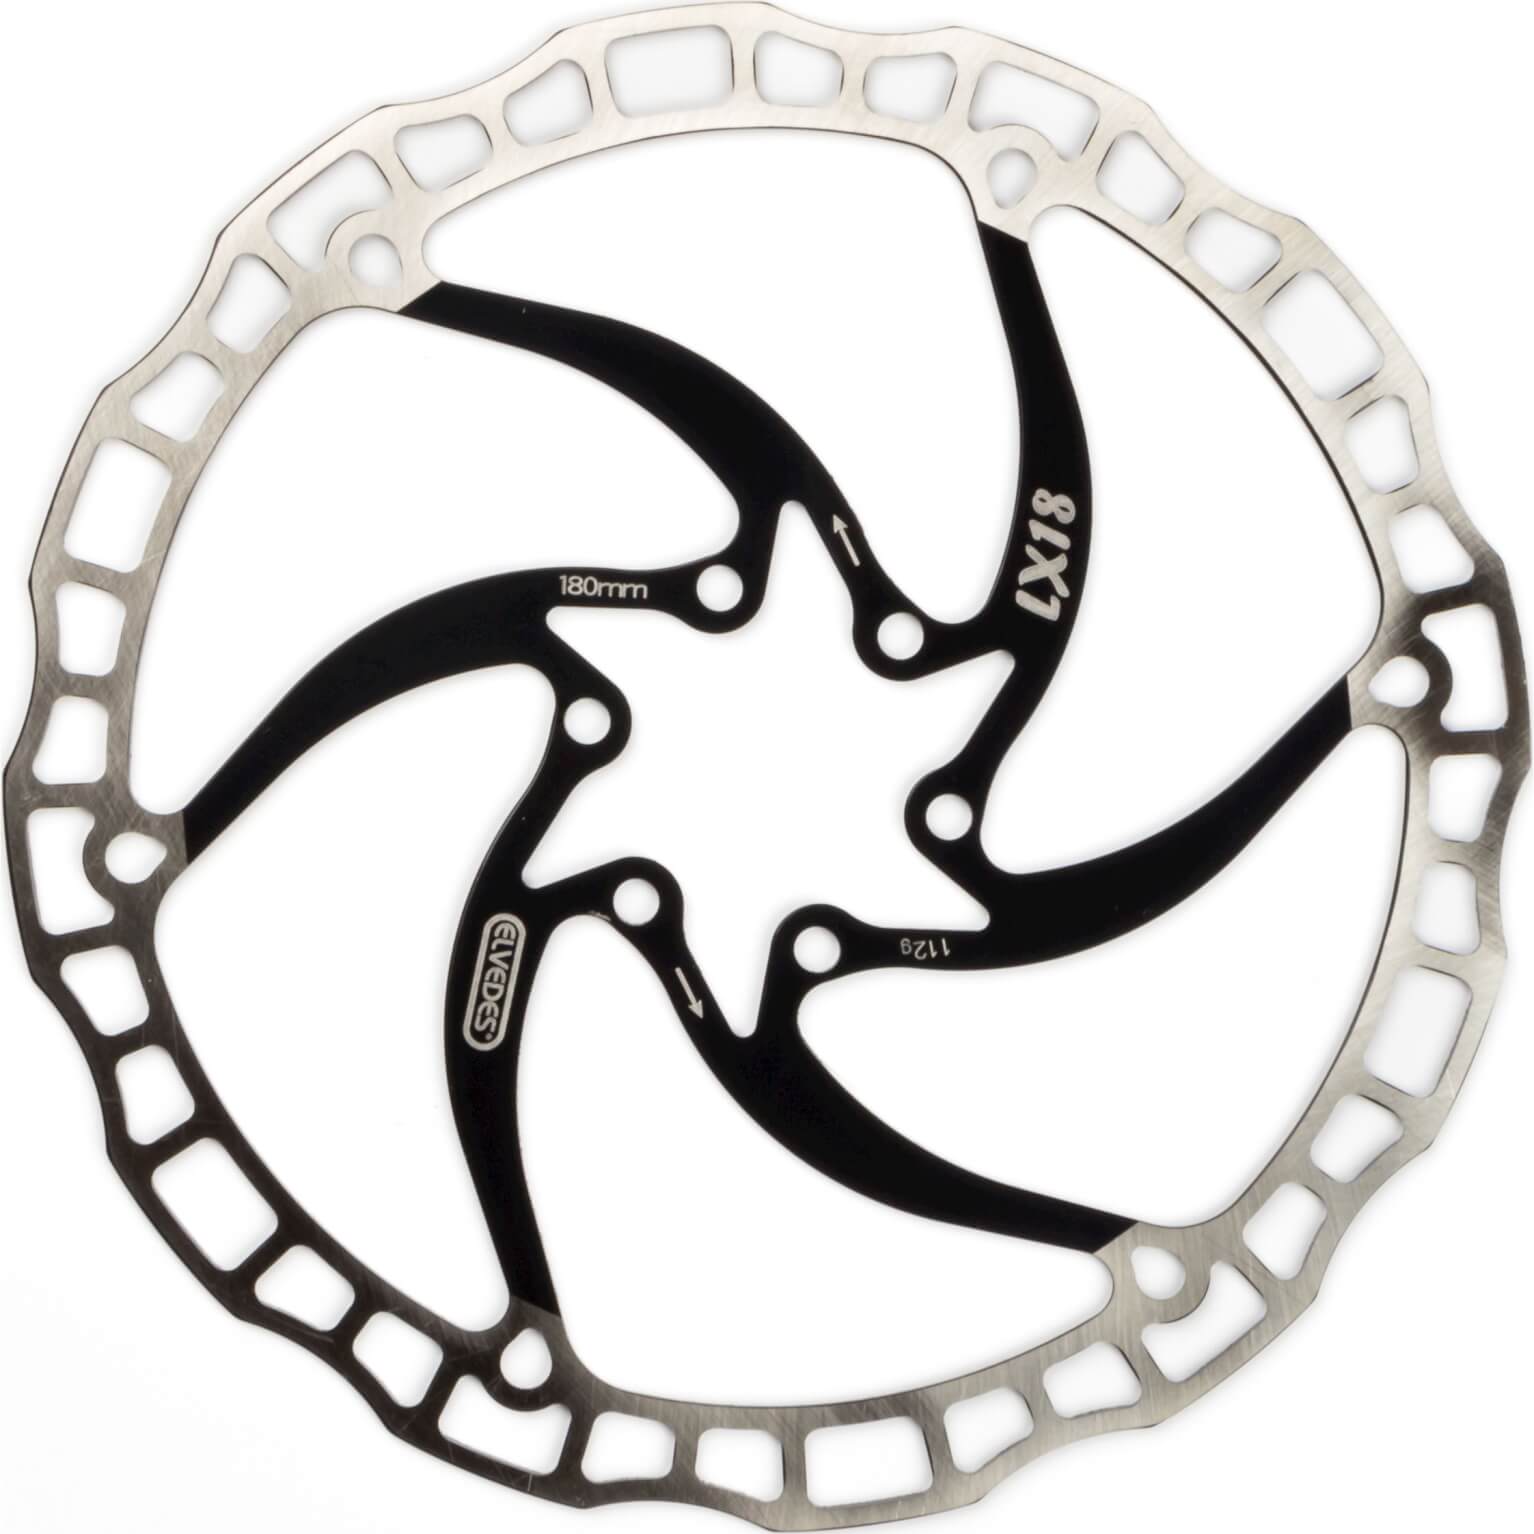 Elvedes one piece rotor 180mm 112g 6 holes+bolt black 2015197